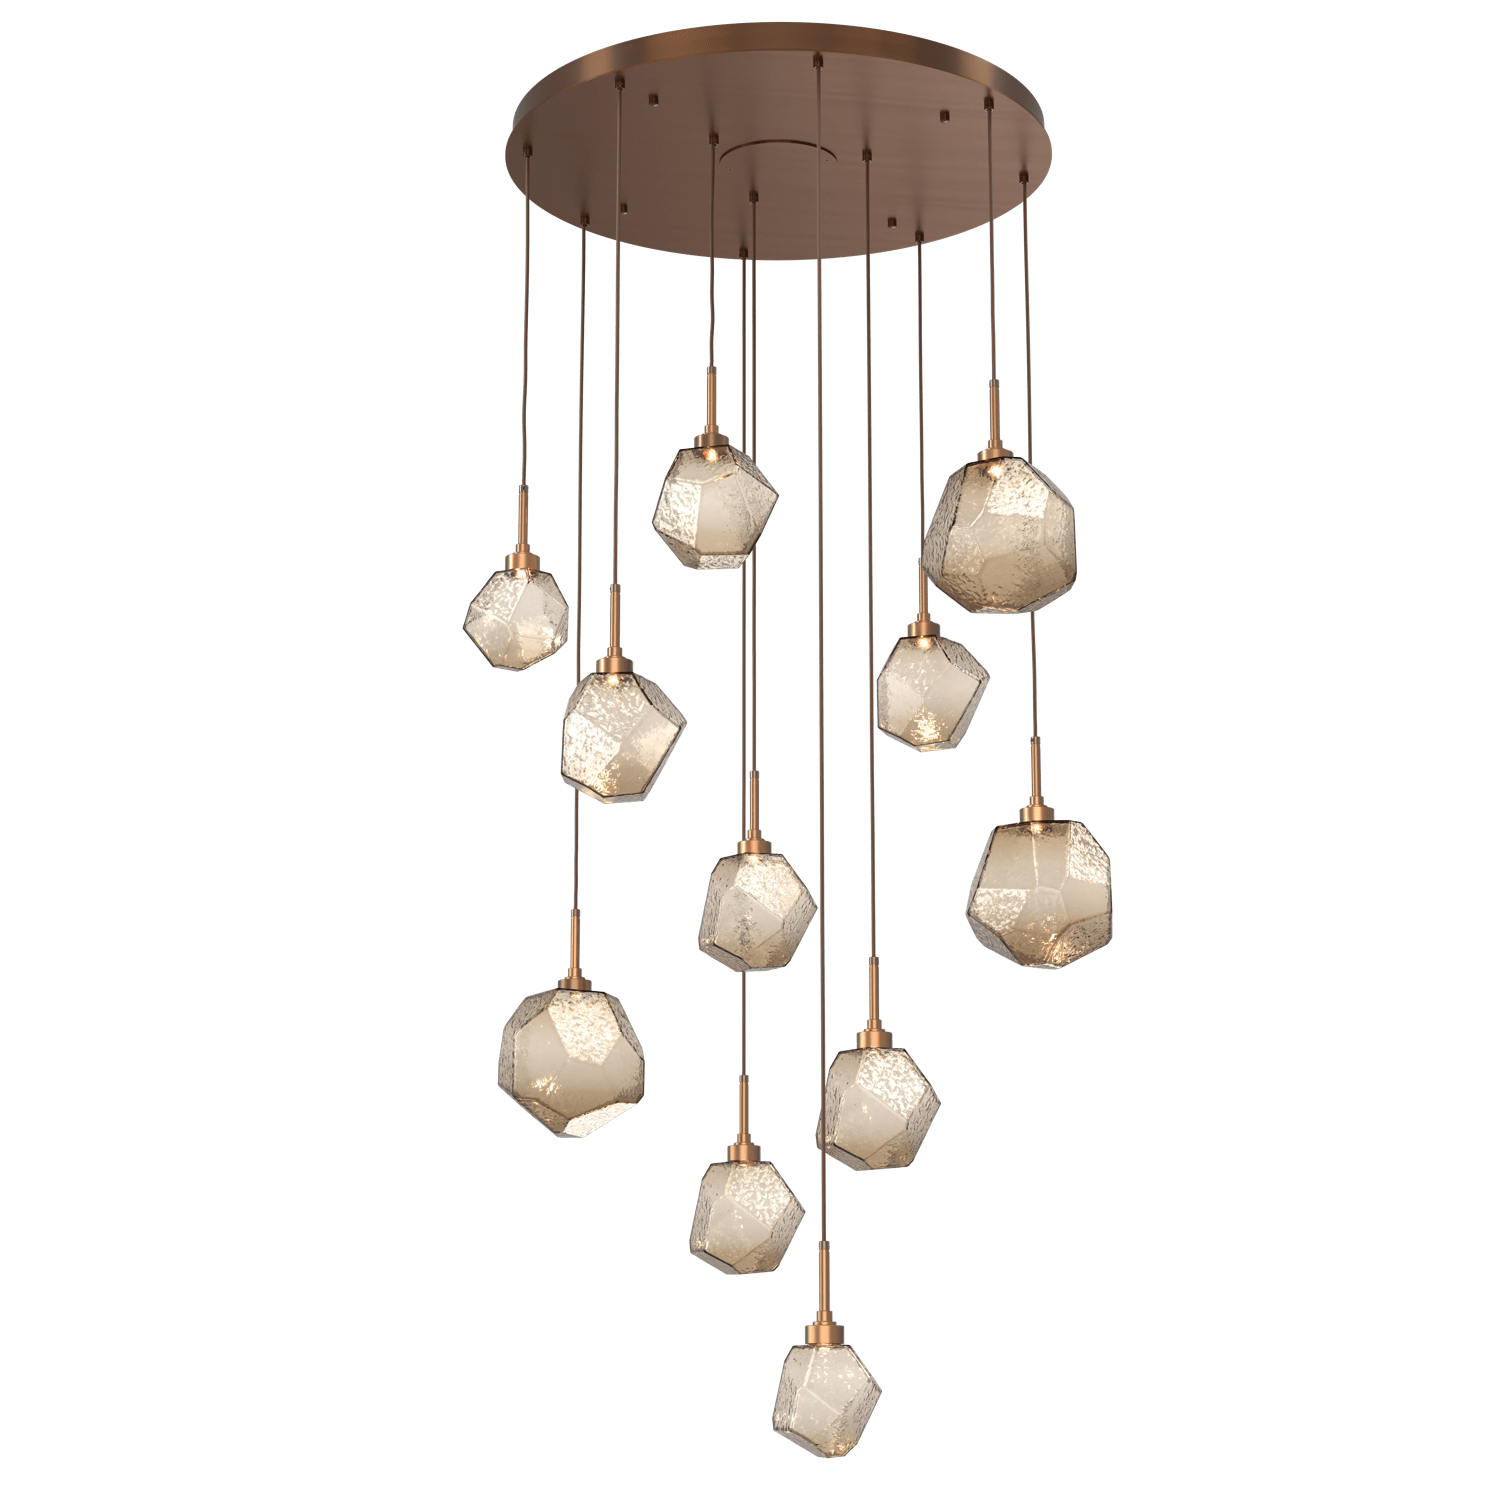 CHB0039-11-RB-B-Hammerton-Studio-Gem-11-light-round-pendant-chandelier-with-oil-rubbed-bronze-finish-and-bronze-blown-glass-shades-and-LED-lamping